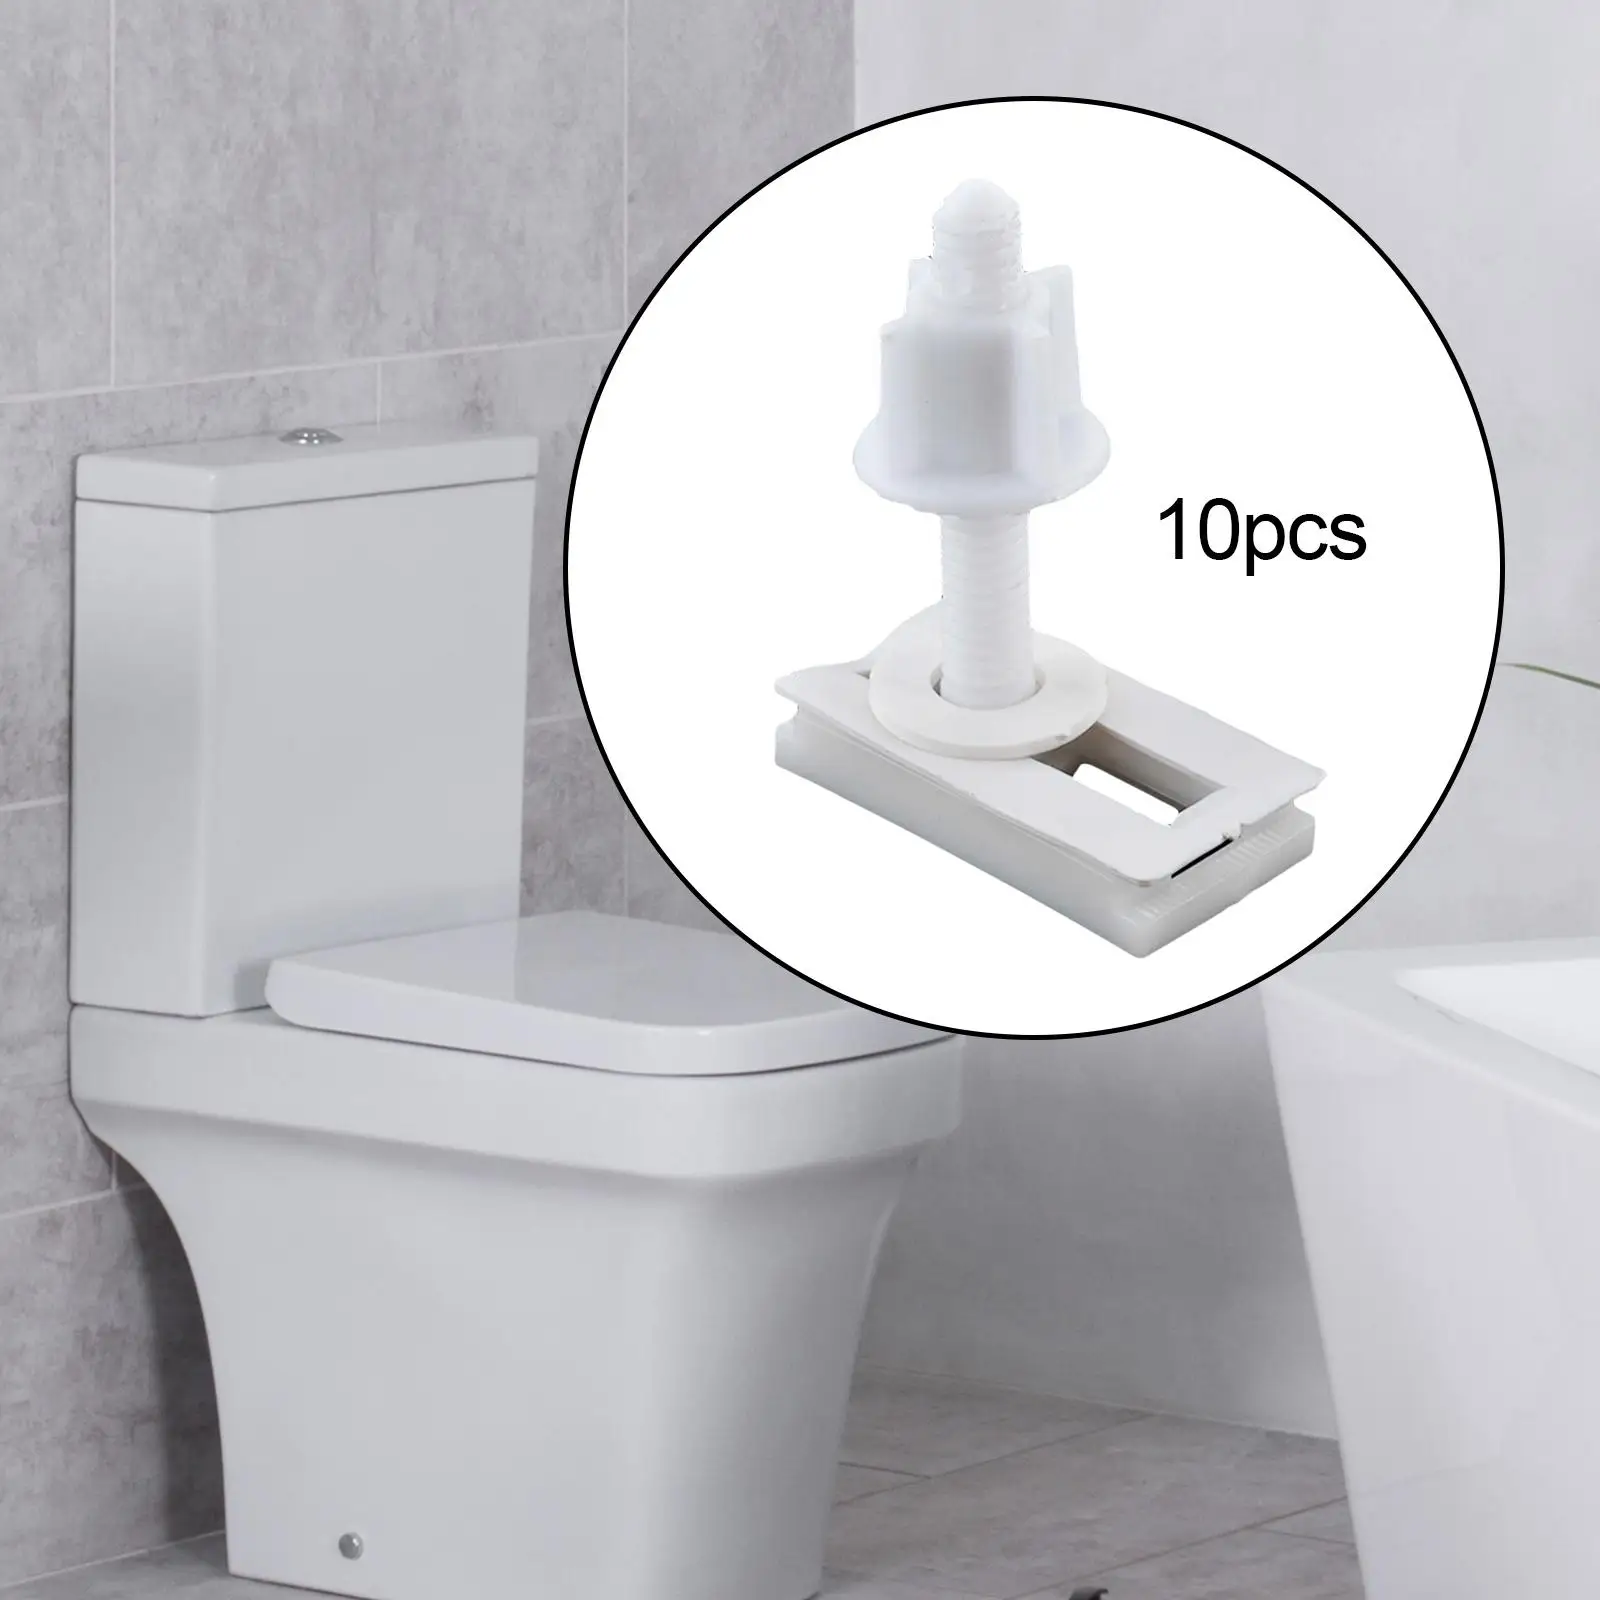 Toilet Seat Hinge Bolt Fitting Screws for Bathrooms Household Public Places